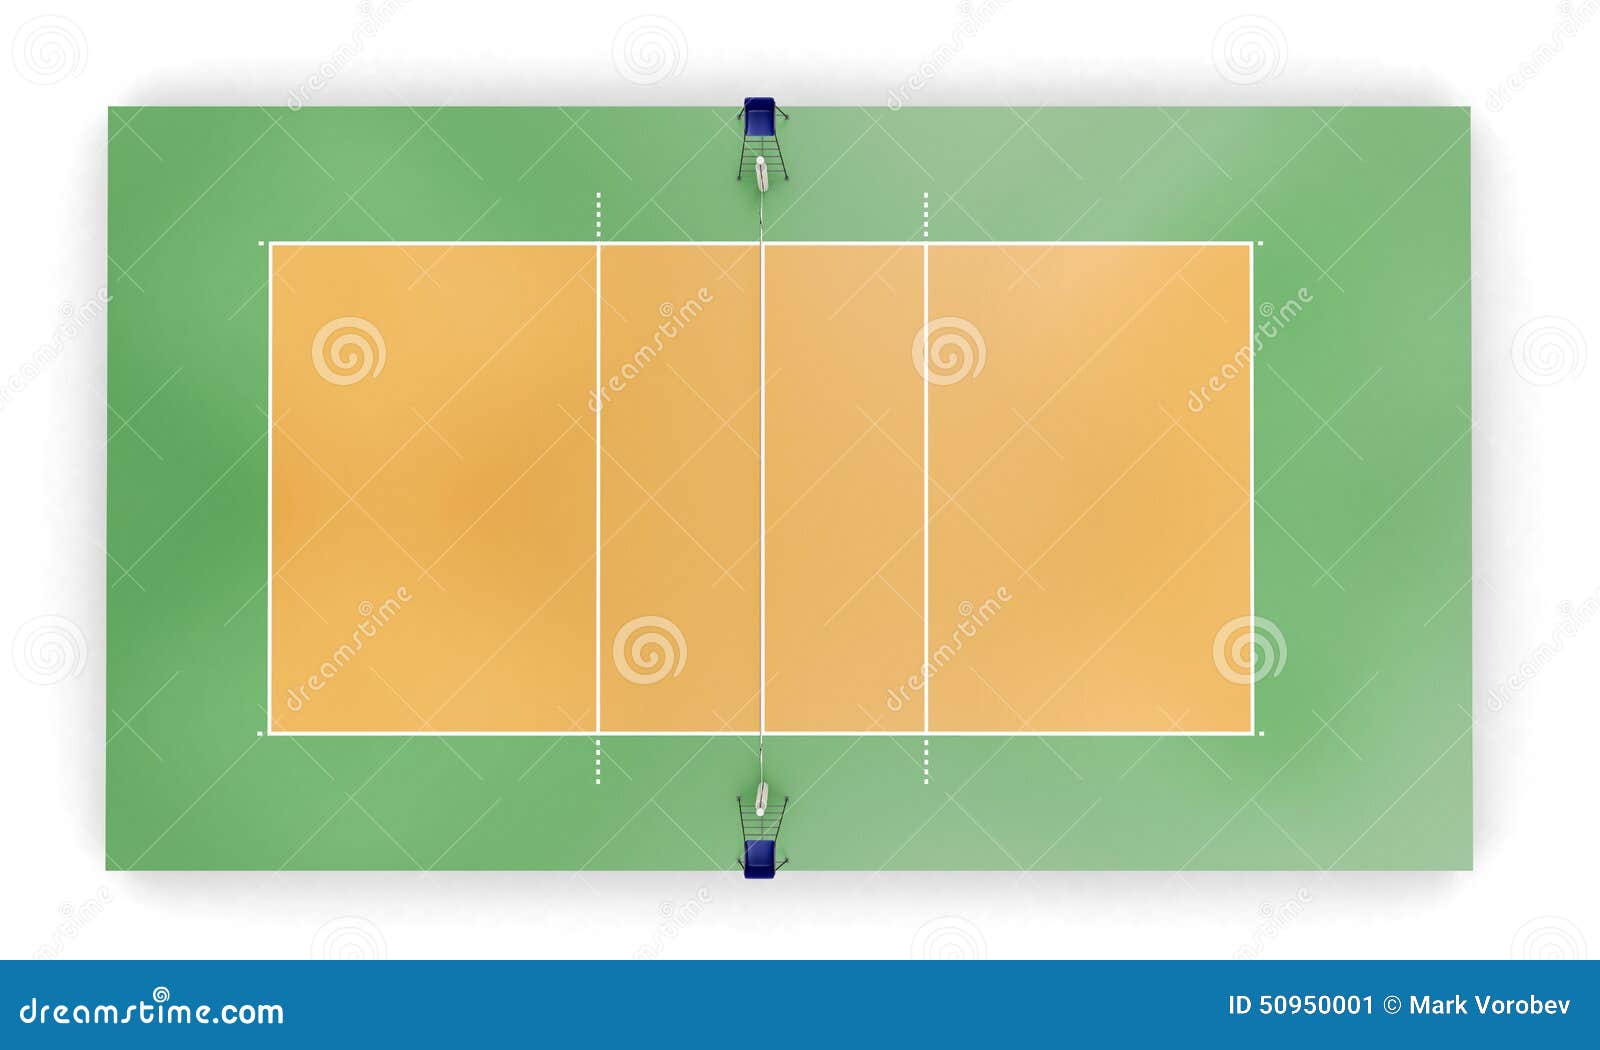 draw a volleyball court diagram with measurements and name the parts​ -  Brainly.in